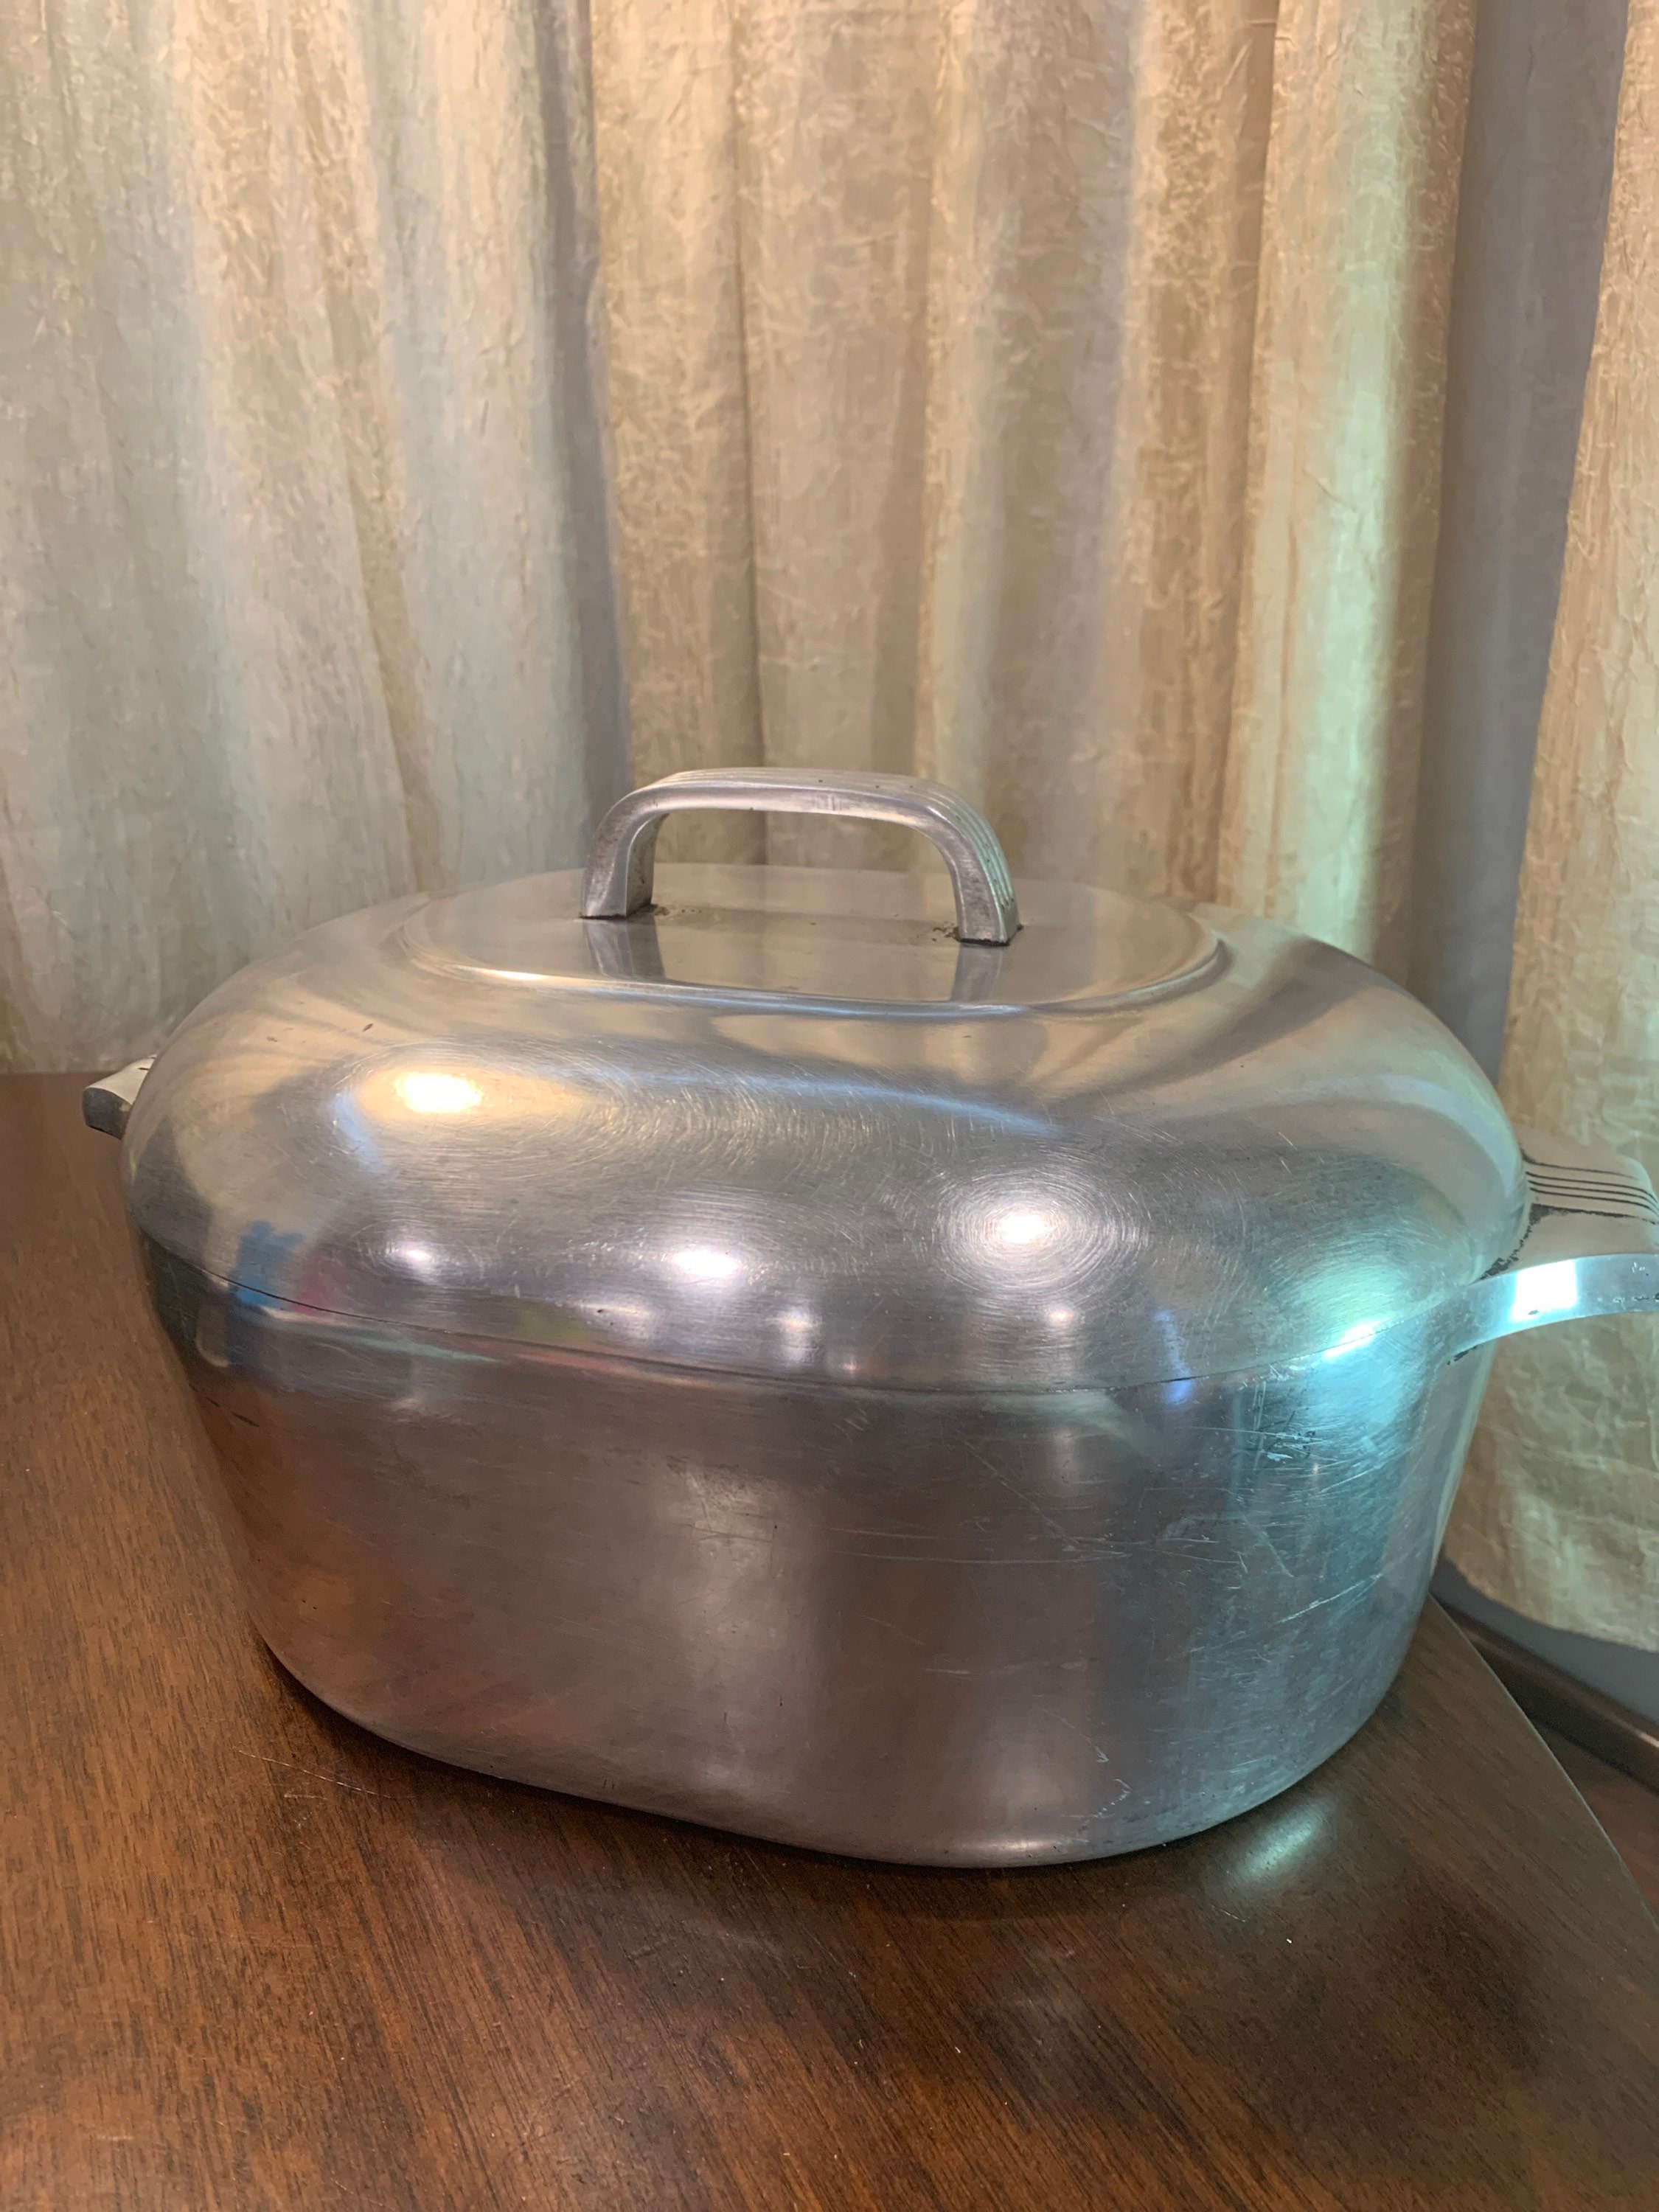 Vintage 13 qt. Magnalite roaster in great condition measures 18 5/8 long x  11 9/16 wide with lid that fits perfectly, 9 tall with handle